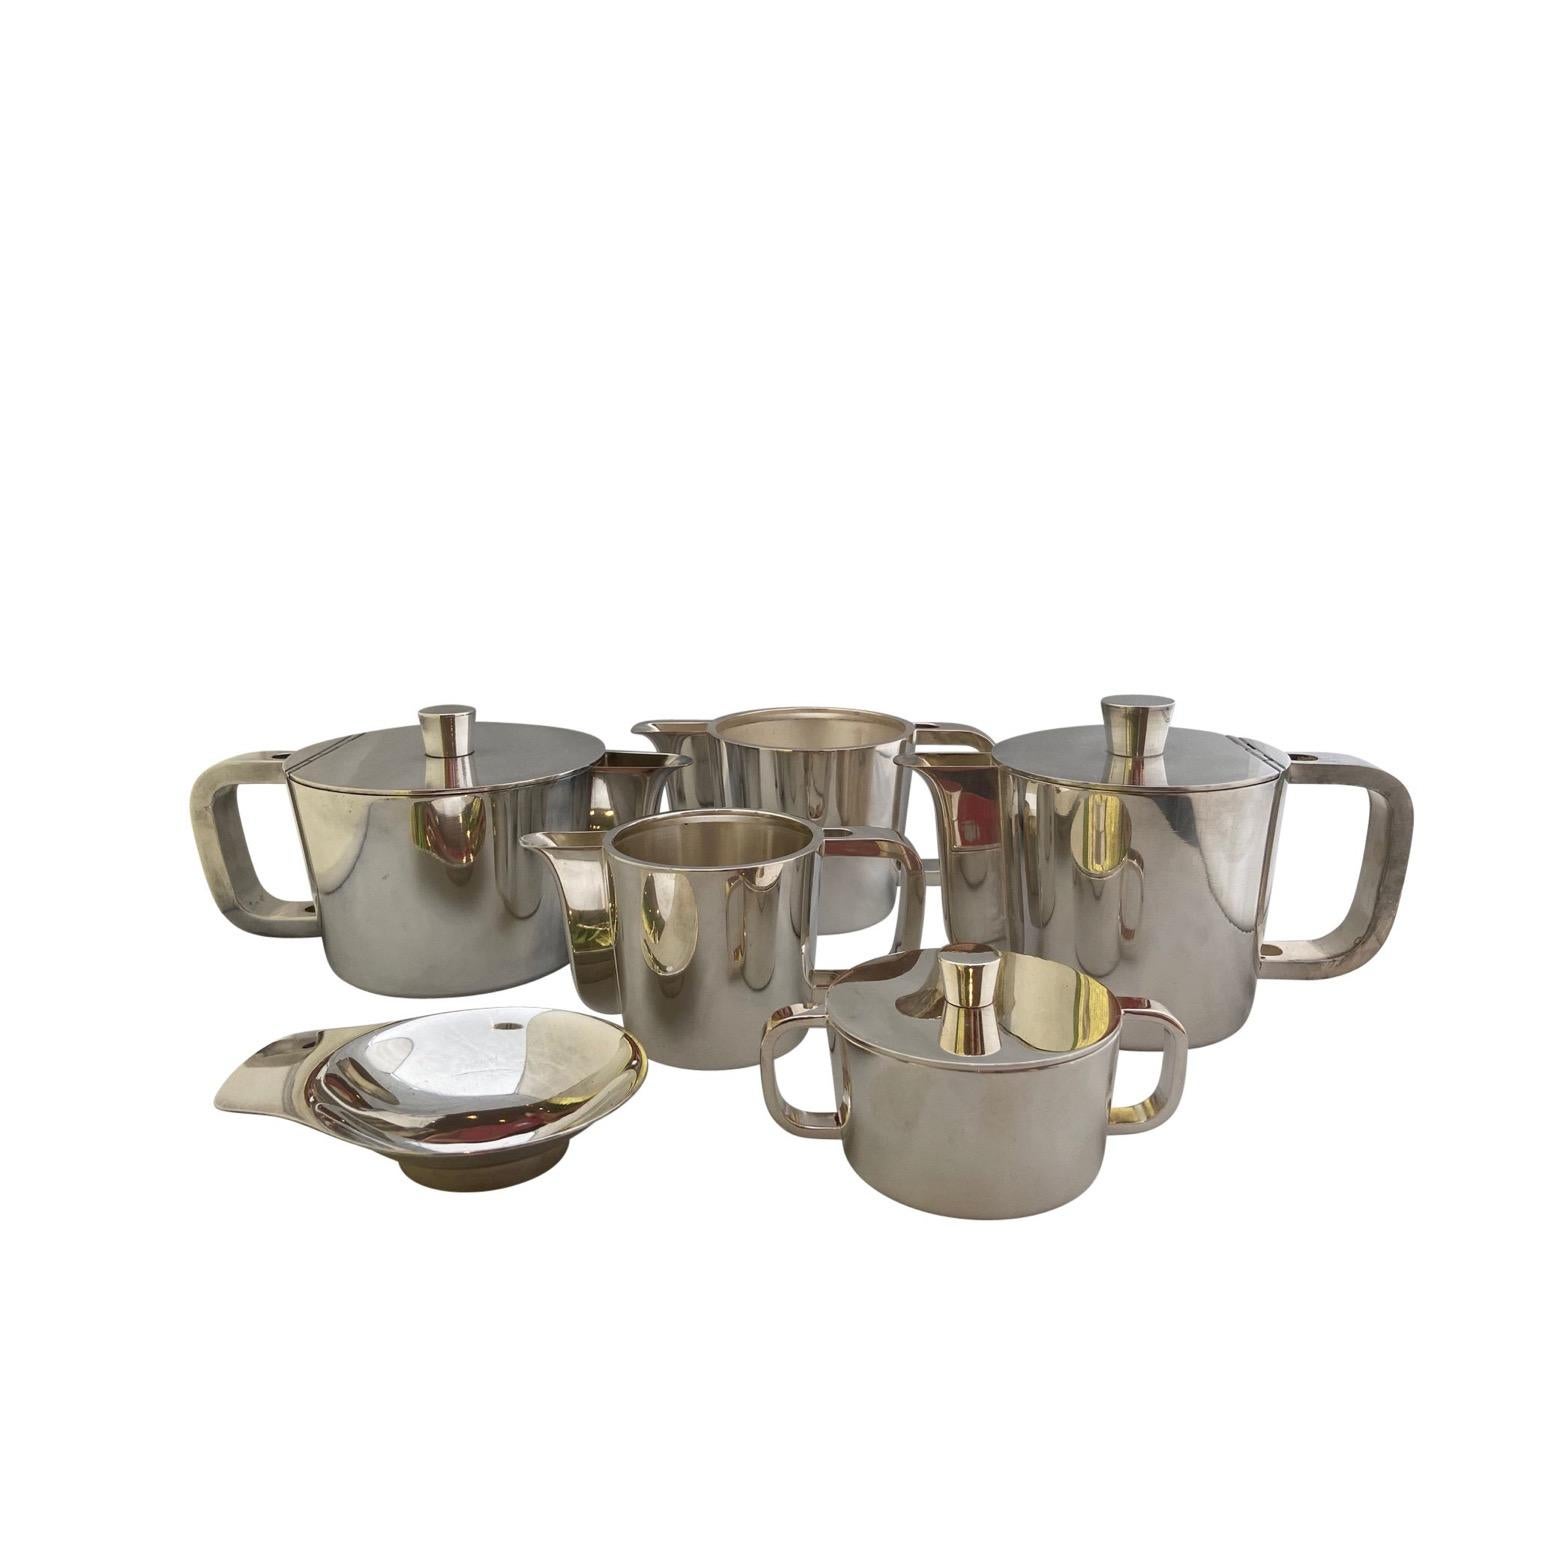 Extensive Silver Plated Gio Ponti Coffee and Tea Set on a Tray, for Arthur Krupp 2